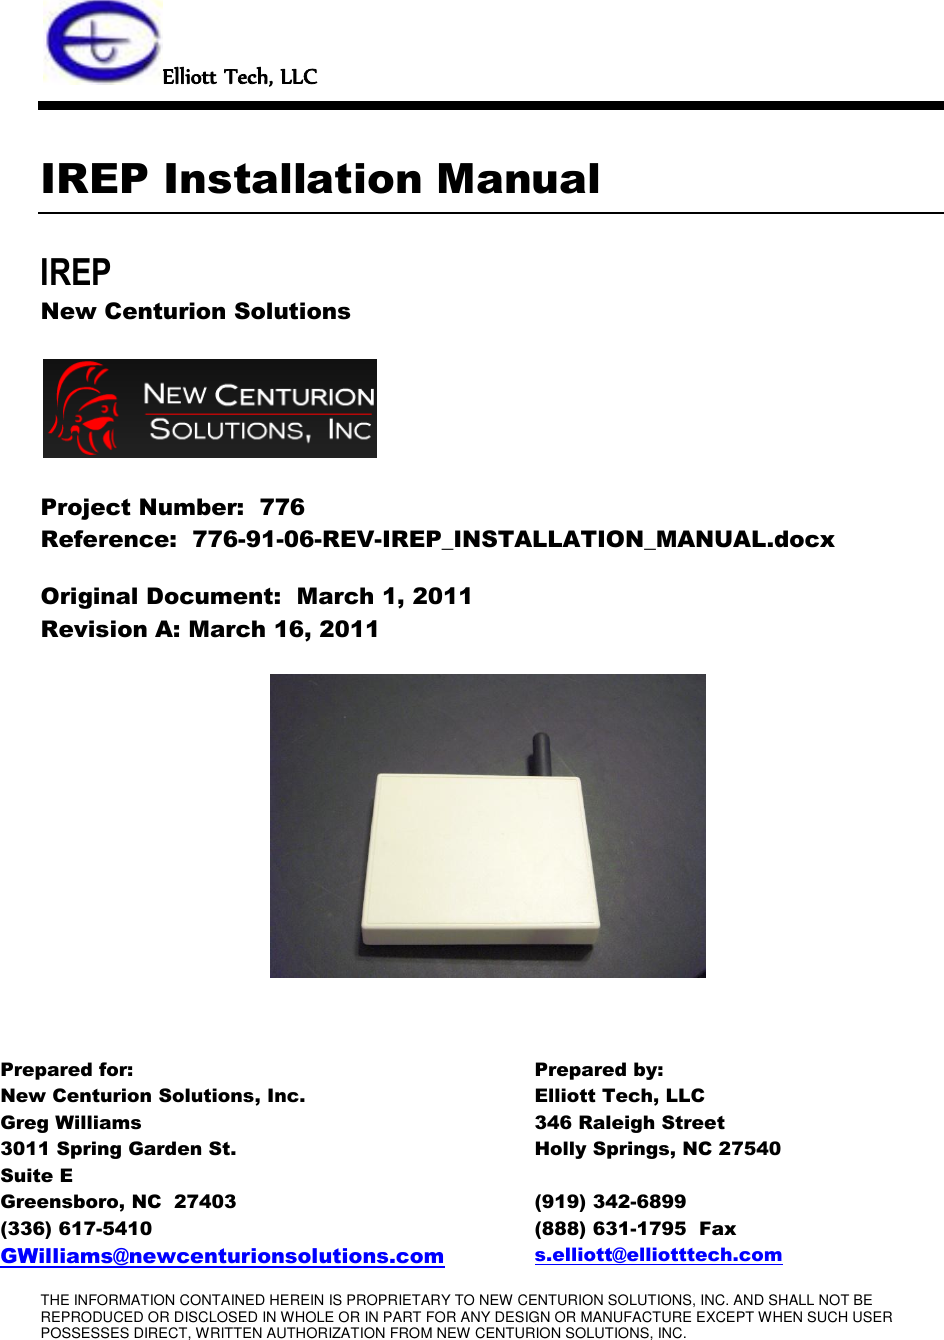 THE INFORMATION CONTAINED HEREIN IS PROPRIETARY TO NEW CENTURION SOLUTIONS, INC. AND SHALL NOT BE REPRODUCED OR DISCLOSED IN WHOLE OR IN PART FOR ANY DESIGN OR MANUFACTURE EXCEPT WHEN SUCH USER POSSESSES DIRECT, WRITTEN AUTHORIZATION FROM NEW CENTURION SOLUTIONS, INC.   Elliott Tech, LLC   IREP Installation Manual IREP New Centurion Solutions    Project Number:  776 Reference:  776-91-06-REV-IREP_INSTALLATION_MANUAL.docx Original Document:  March 1, 2011 Revision A: March 16, 2011       Prepared for: Prepared by: New Centurion Solutions, Inc. Greg Williams 3011 Spring Garden St. Suite E Greensboro, NC  27403 (336) 617-5410 GWilliams@newcenturionsolutions.com Elliott Tech, LLC 346 Raleigh Street Holly Springs, NC 27540  (919) 342-6899 (888) 631-1795  Fax s.elliott@elliotttech.com 